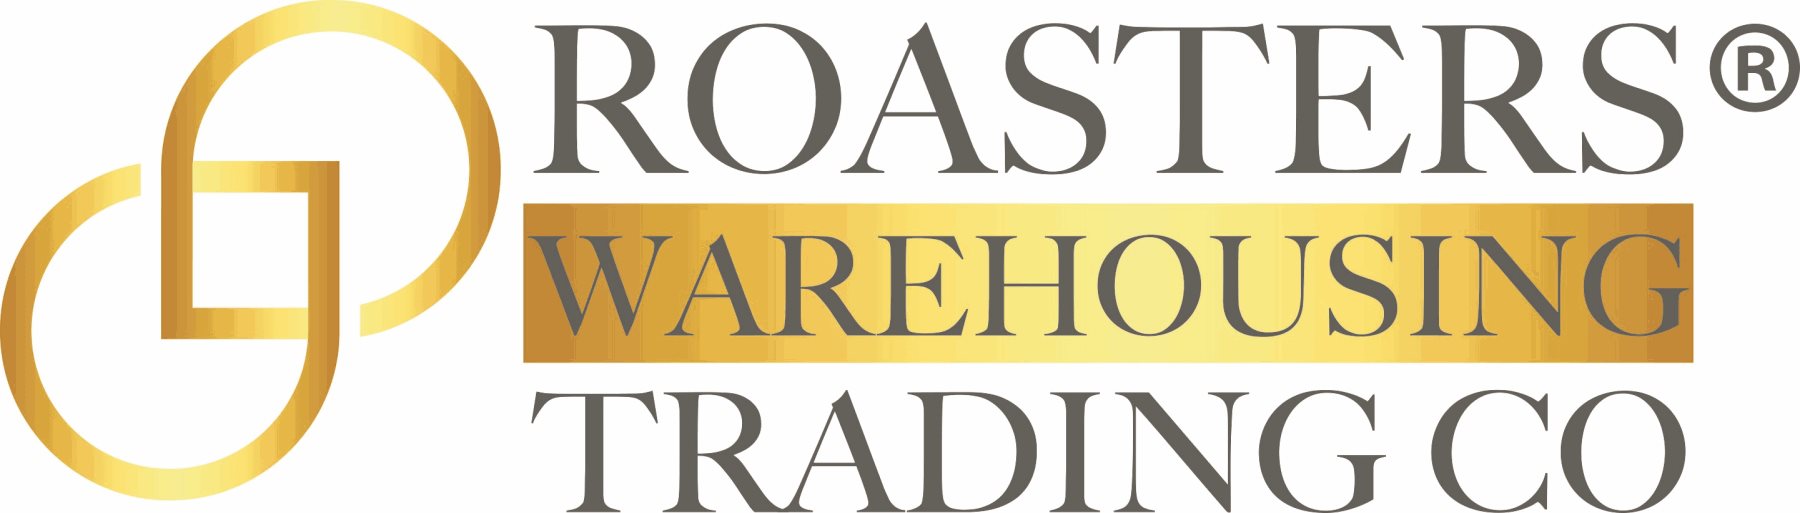 Roasters Warehouse Trading Co